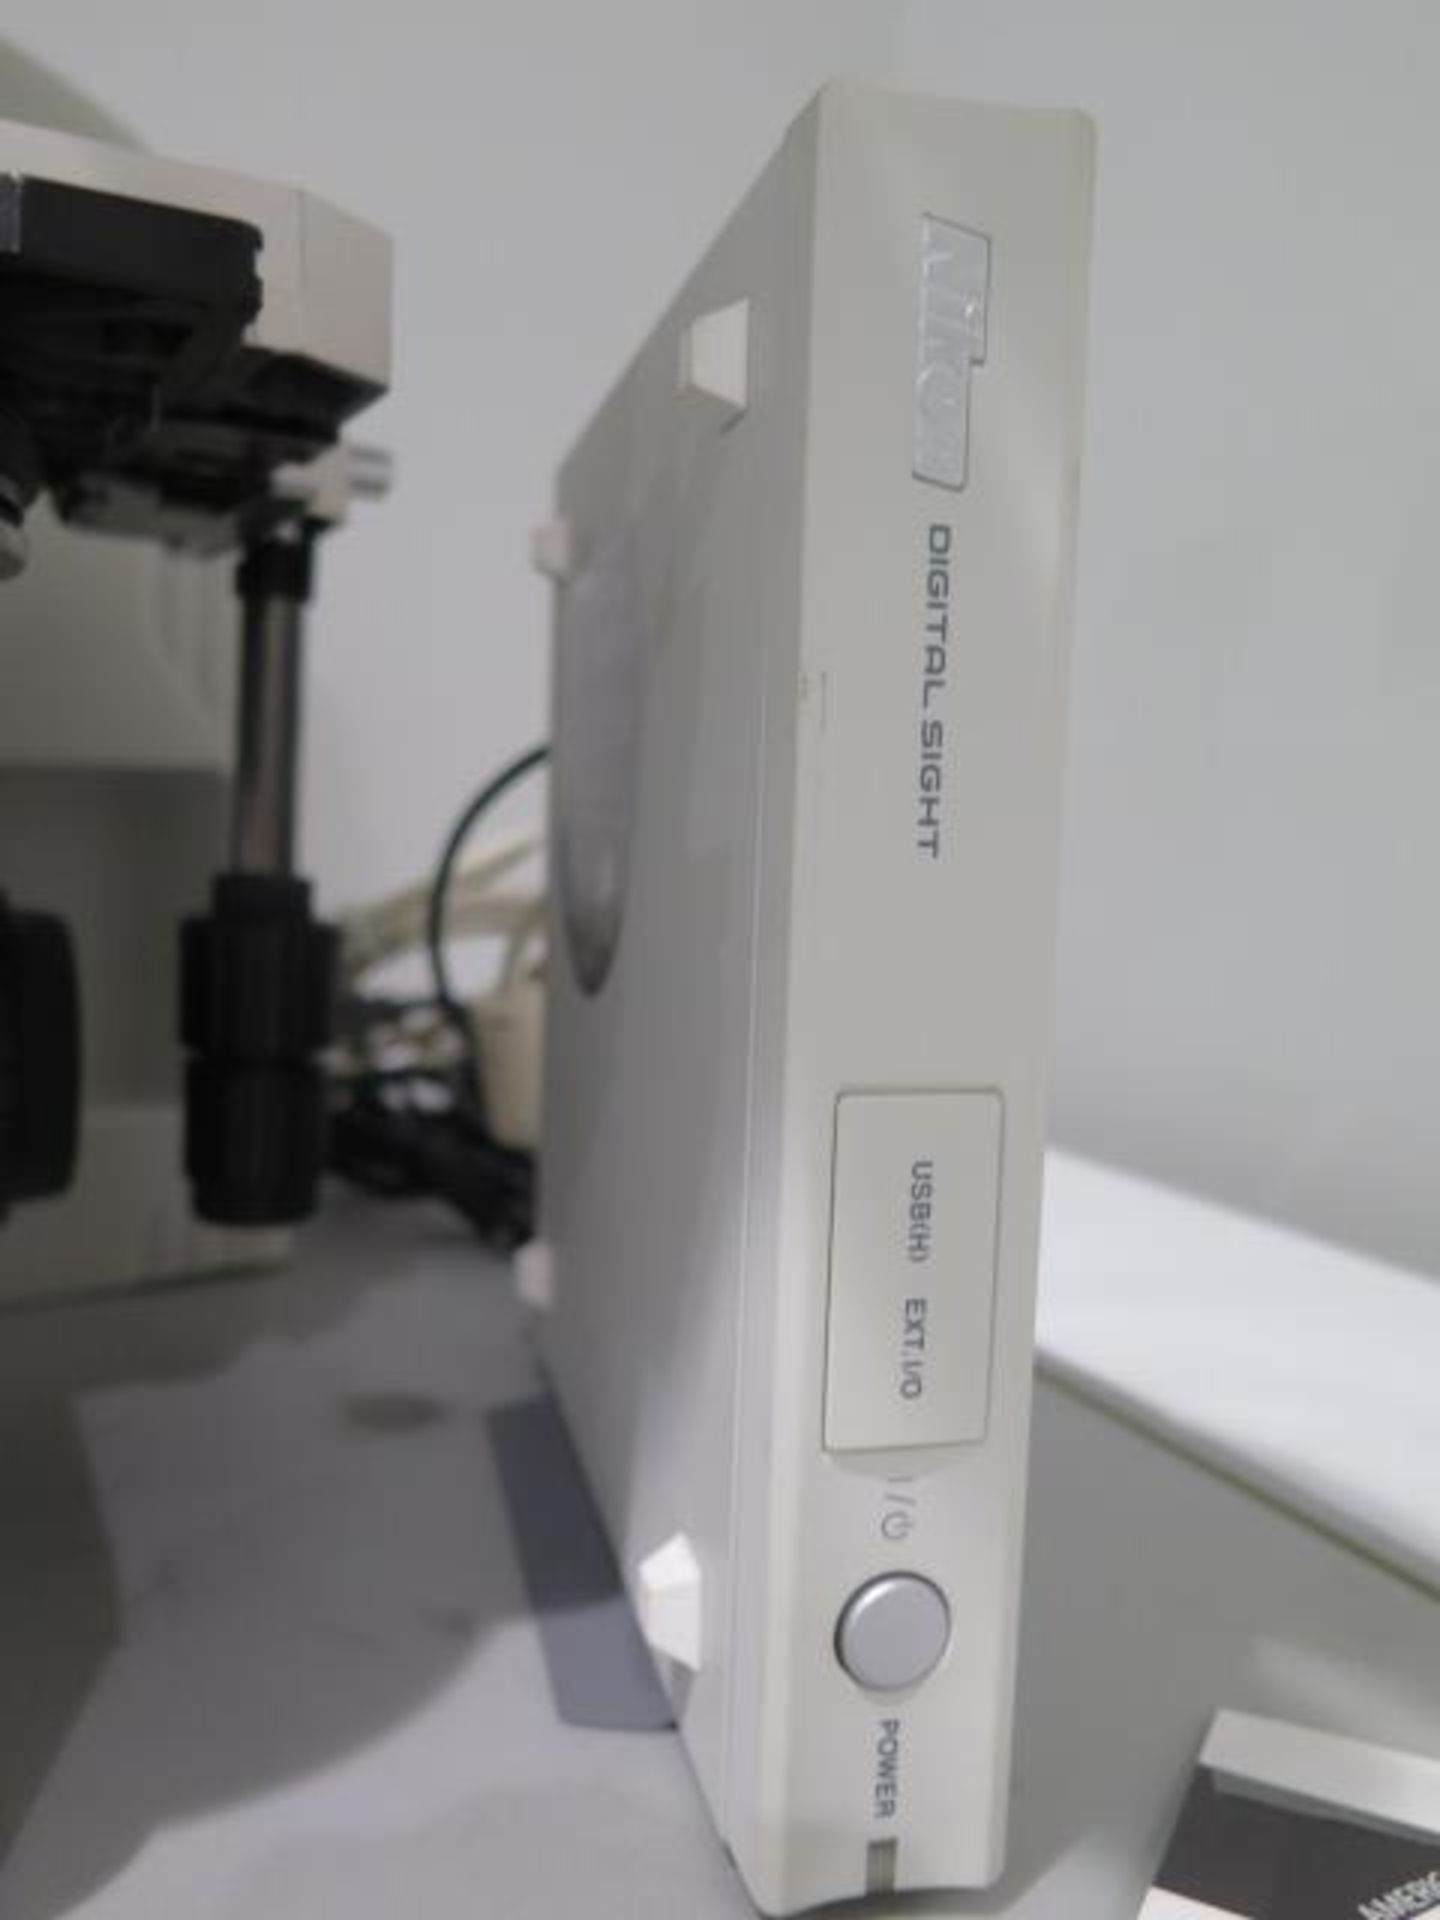 Nikon Eclipse E600 Research Microscope s/n 763673 w/ Nikon Light,DS-U2 Digital Sight Unit,SOLD AS IS - Image 13 of 15